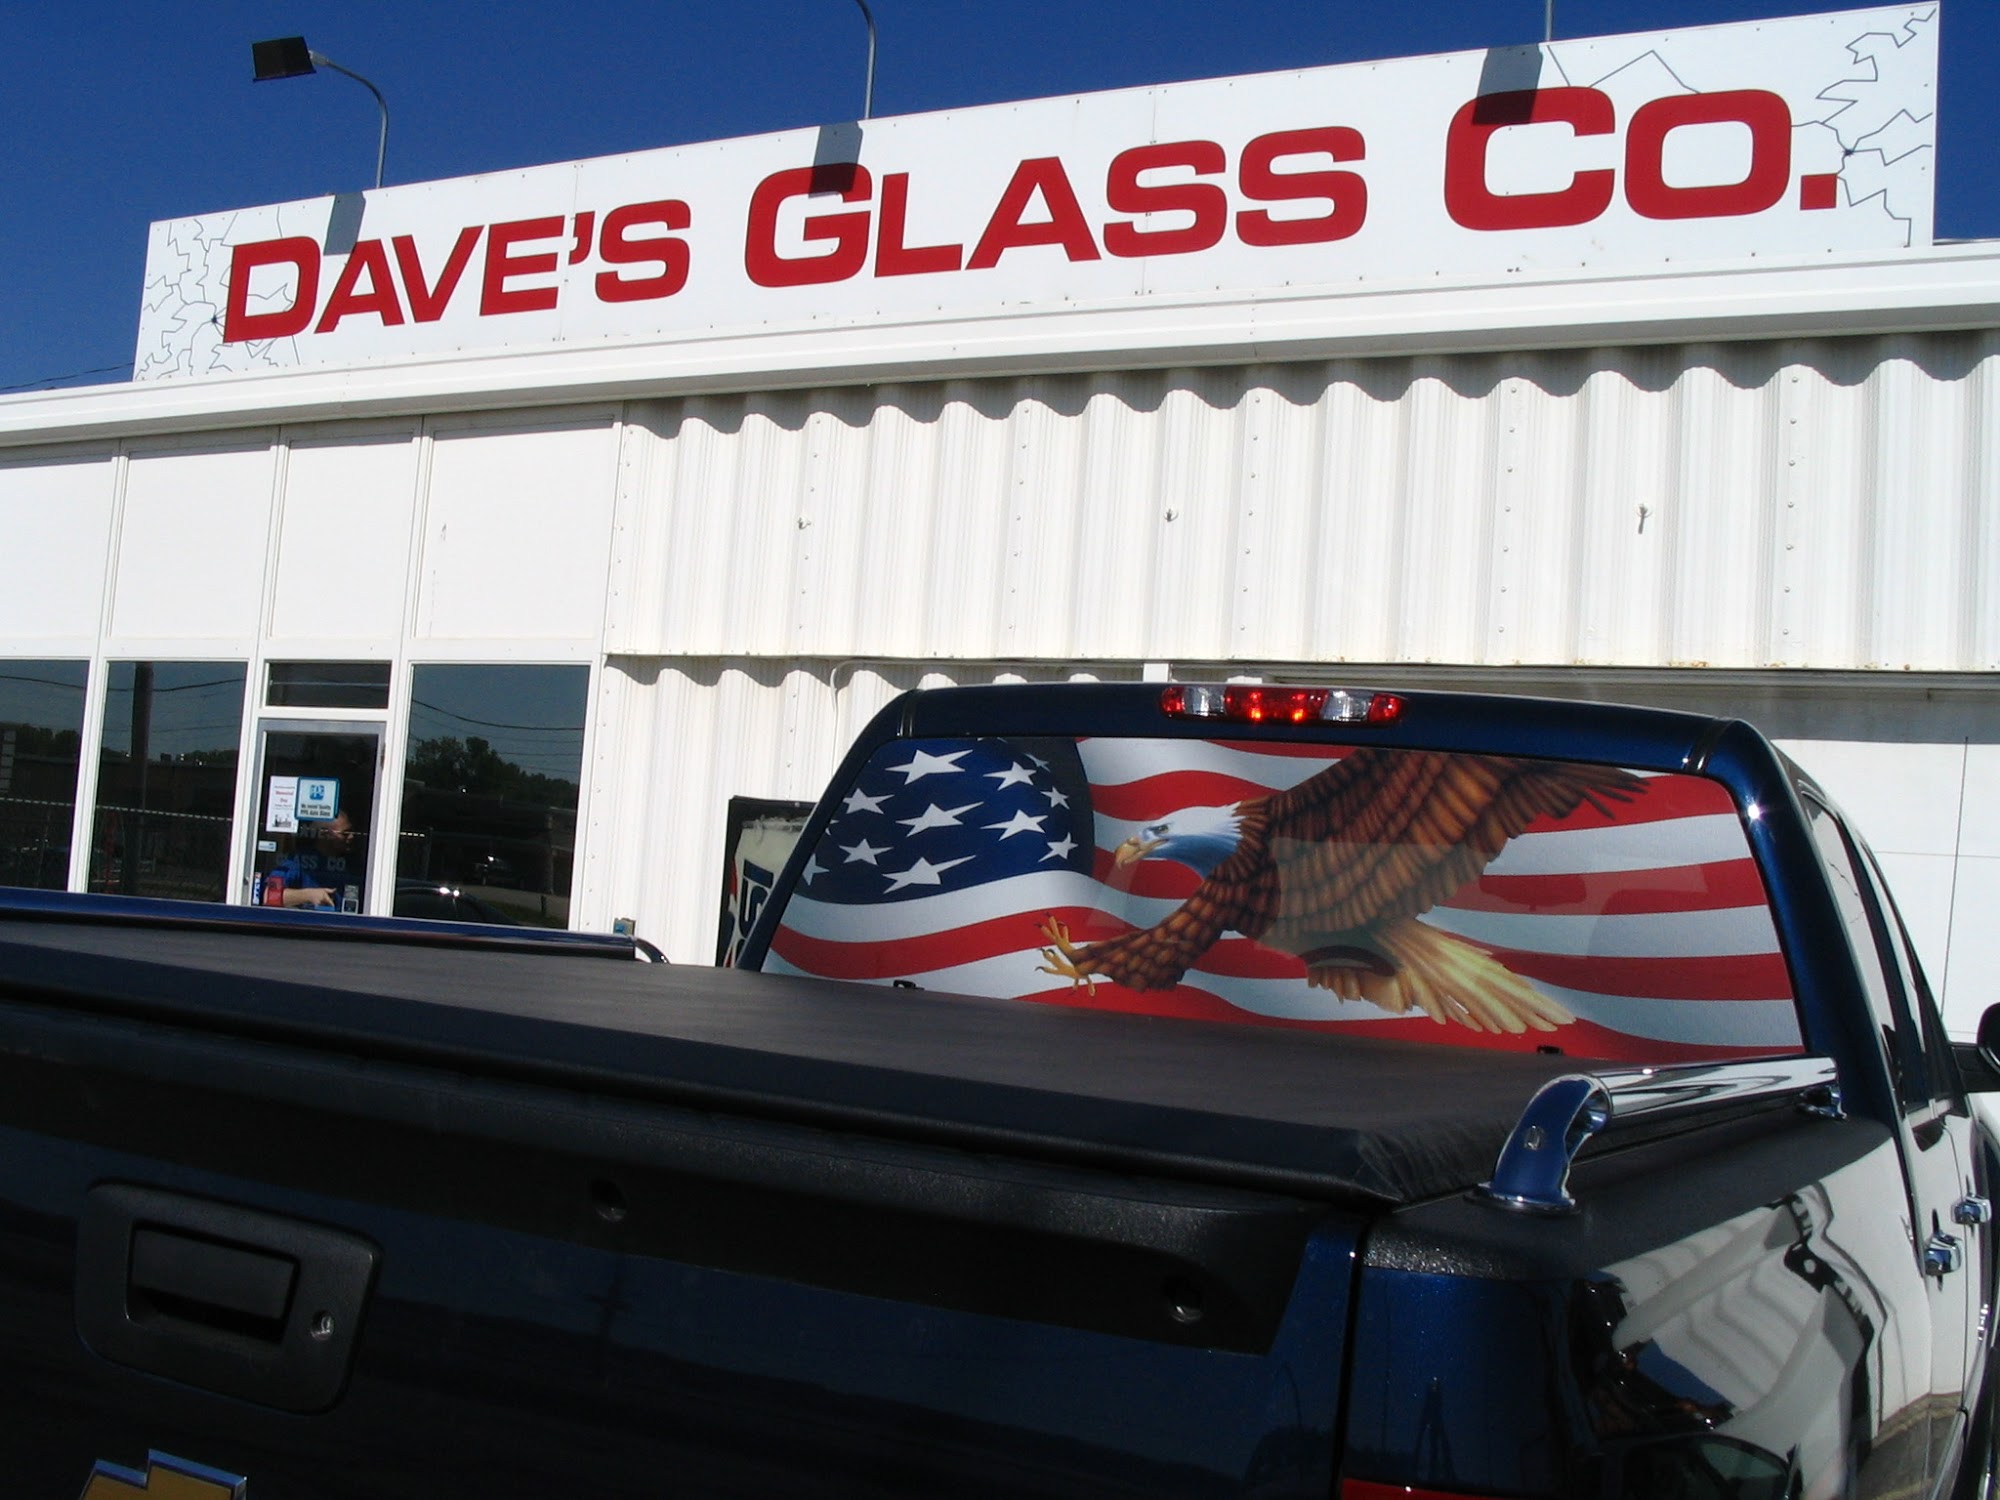 Dave's Glass Co.